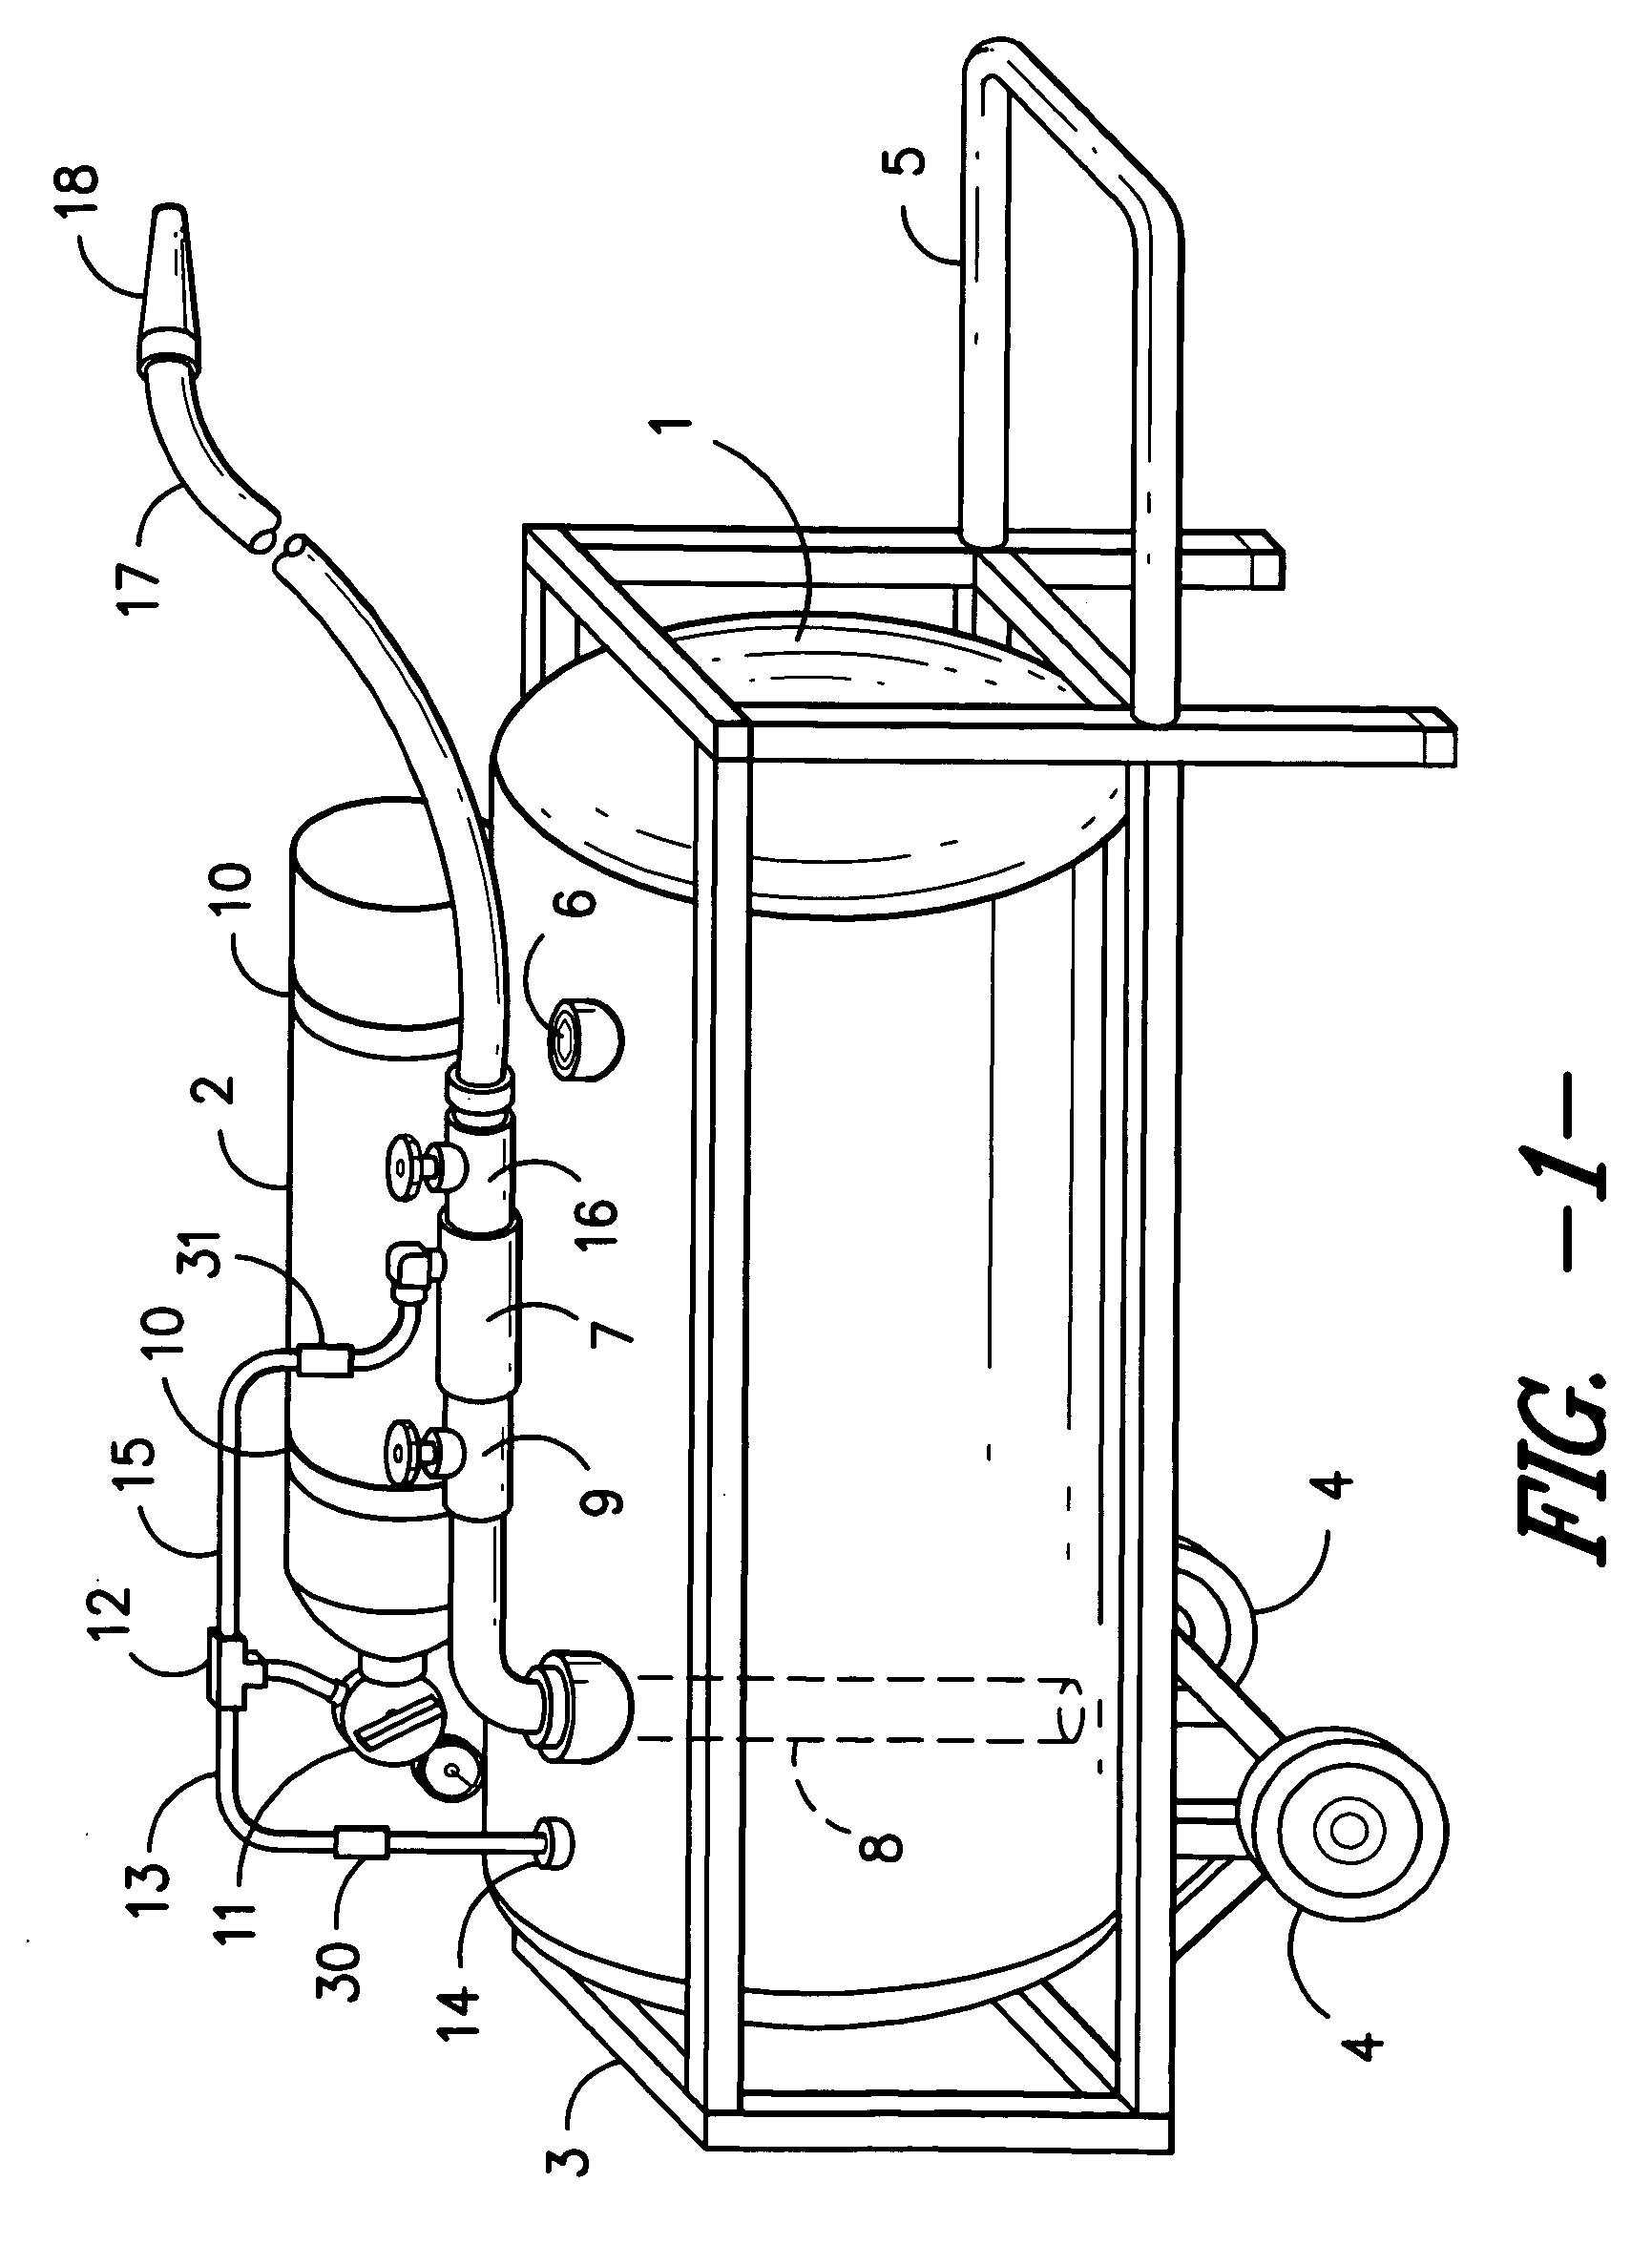 Fire suppression apparatus and method for generating foam